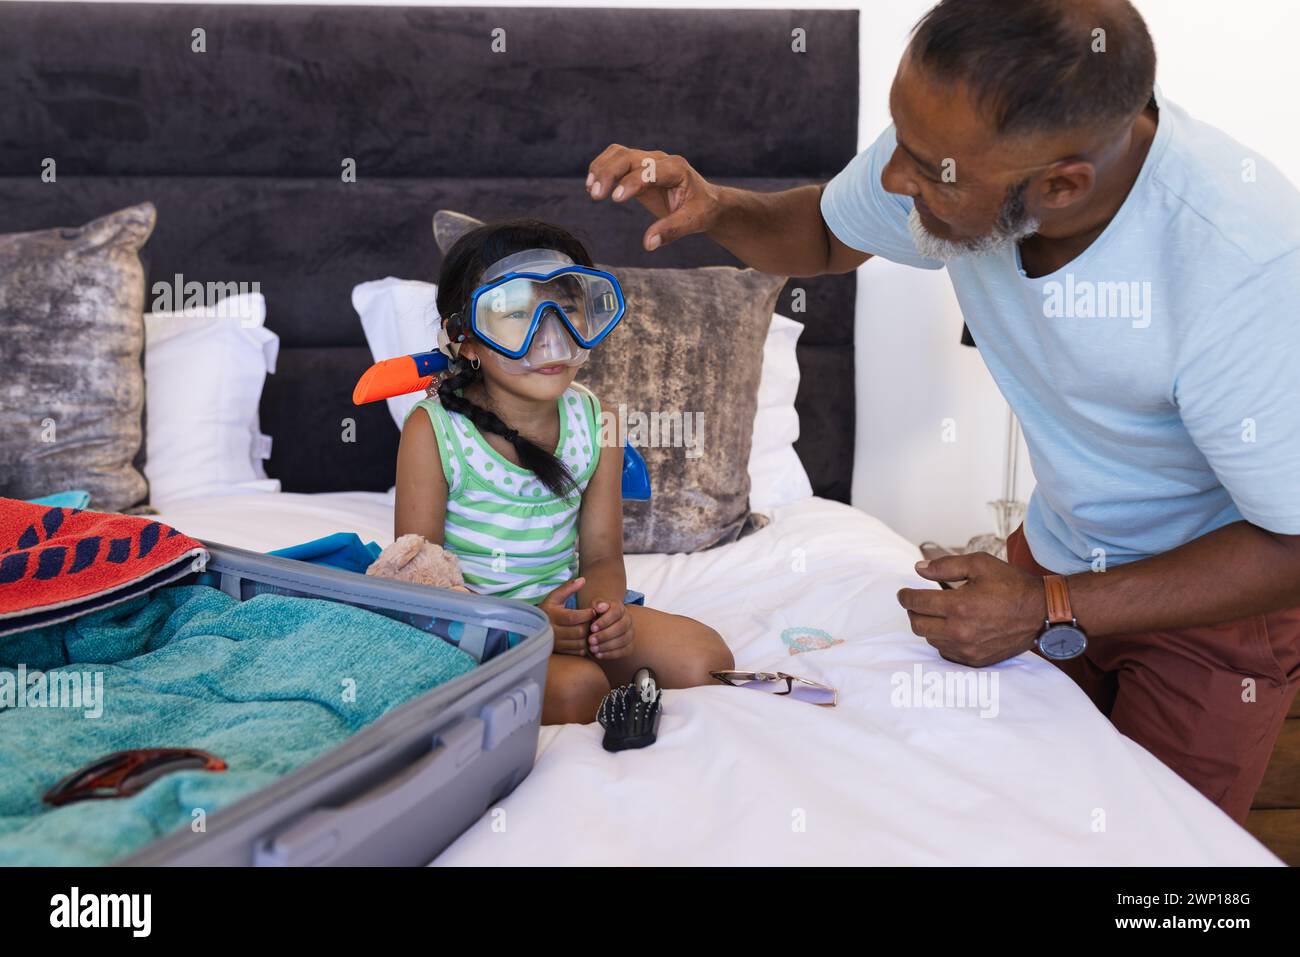 Grandfather helps his young granddaughter try on snorkeling gear in a bedroom Stock Photo